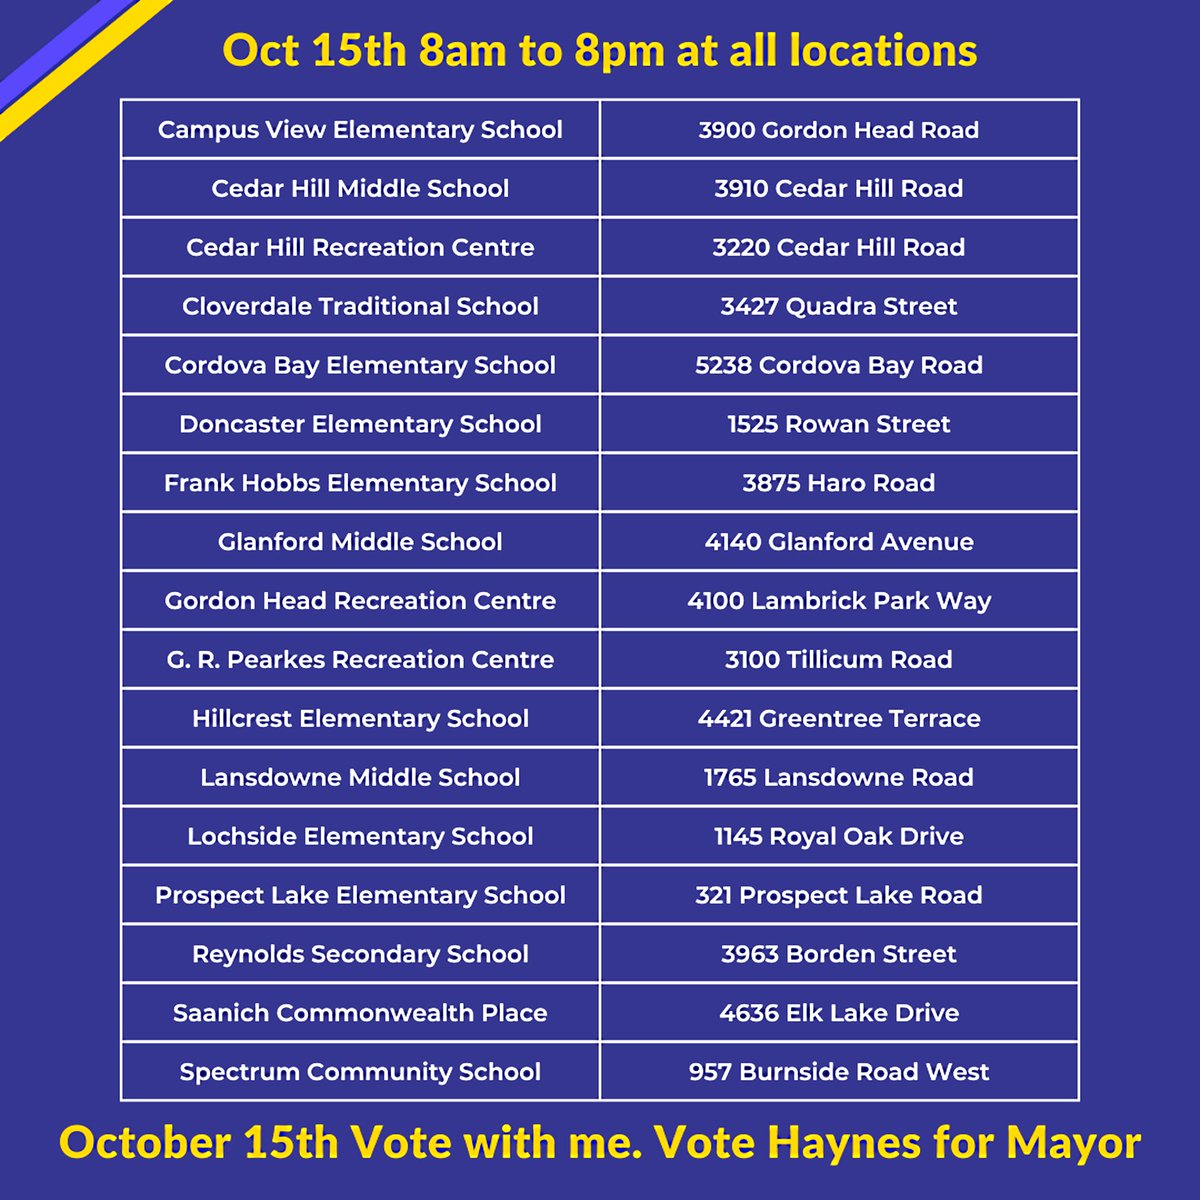 It's voting day today! Please vote Fred Haynes for Saanich Mayor today. You can see my platform at fredhaynes.ca/platform/ #yyj #yyjpoli #saanich #SaanichVotes2022 #VoteHaynes